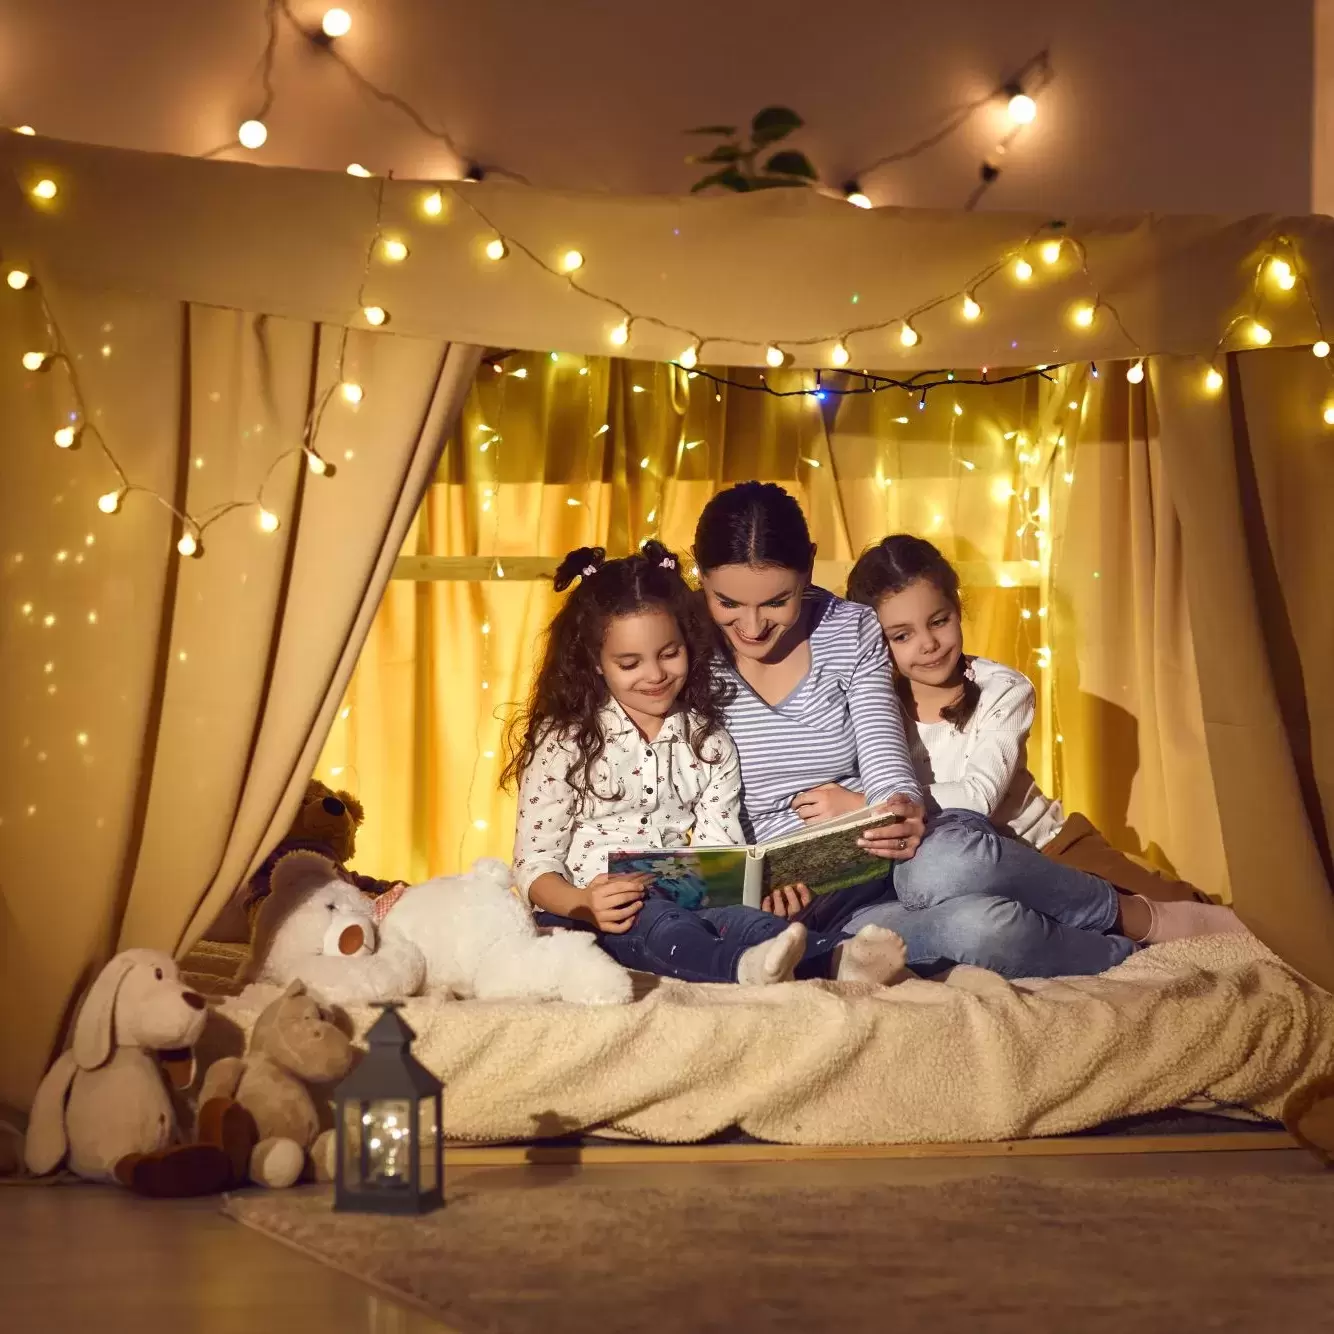 A mother reading a book to her two daughters in front of an indoor fort with sheets and twinkly lights.